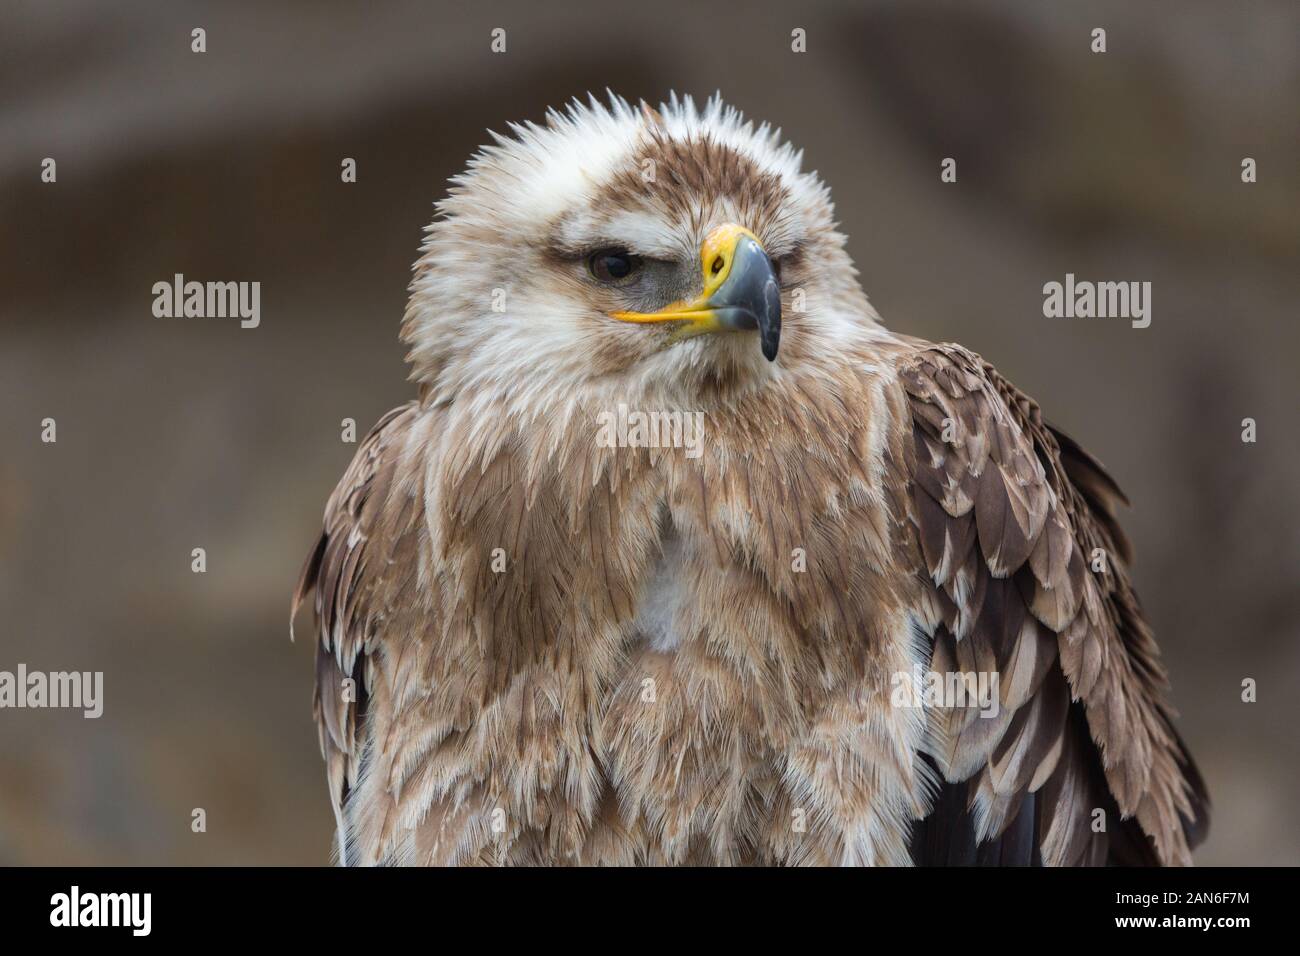 Close-up view on Eastern Imperial Eagle turning its head to the right. Latin name: aquila heliaca. White and brown feathers. Detailed view on head. Stock Photo